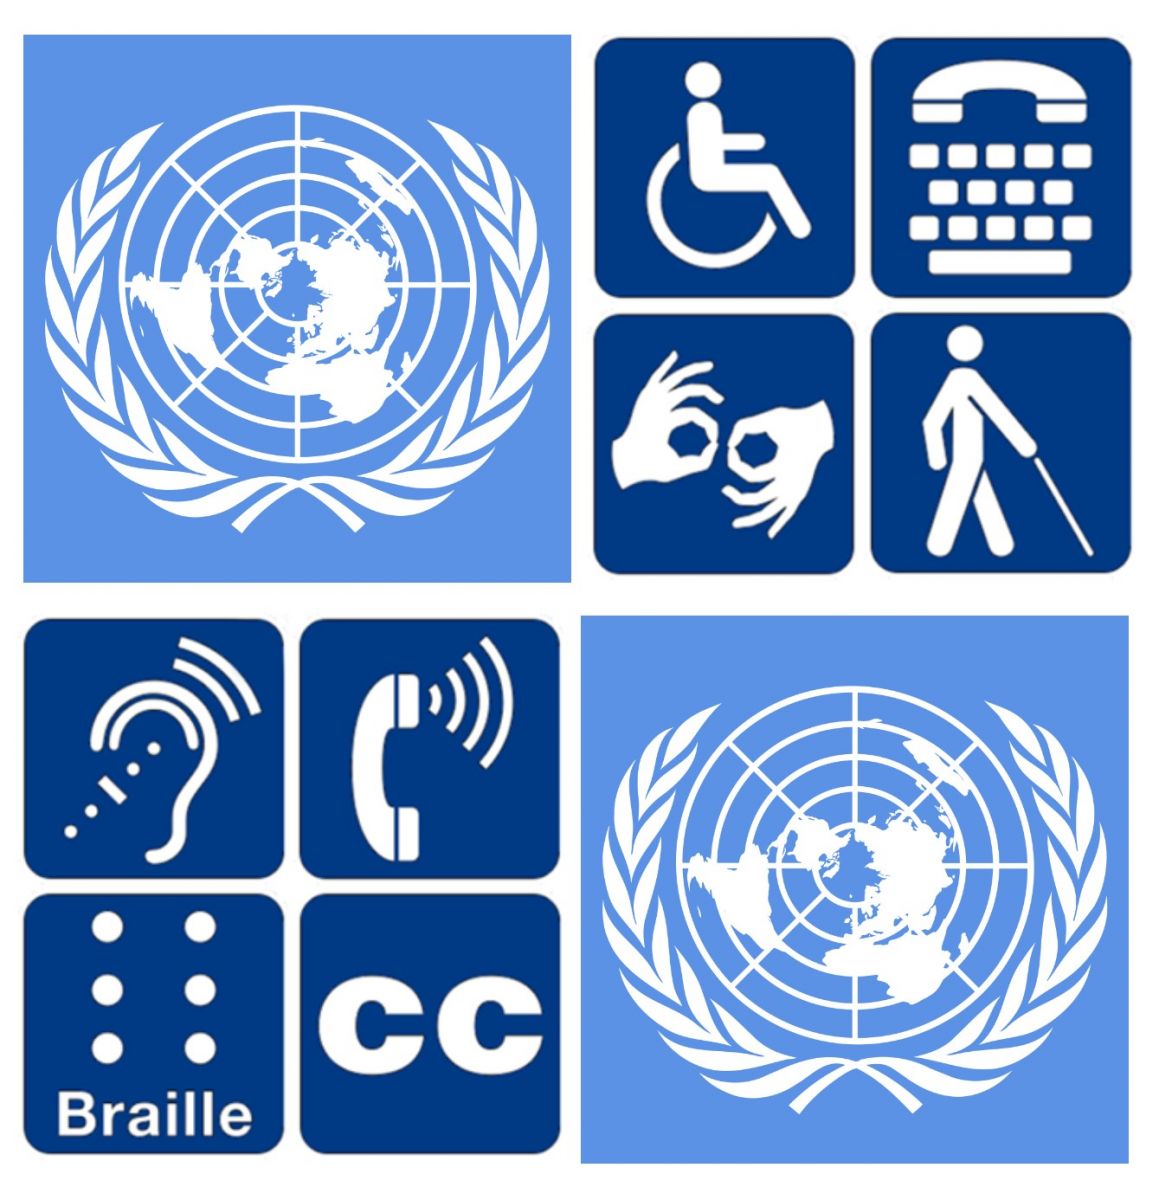 UN Logo and Accessible Signage